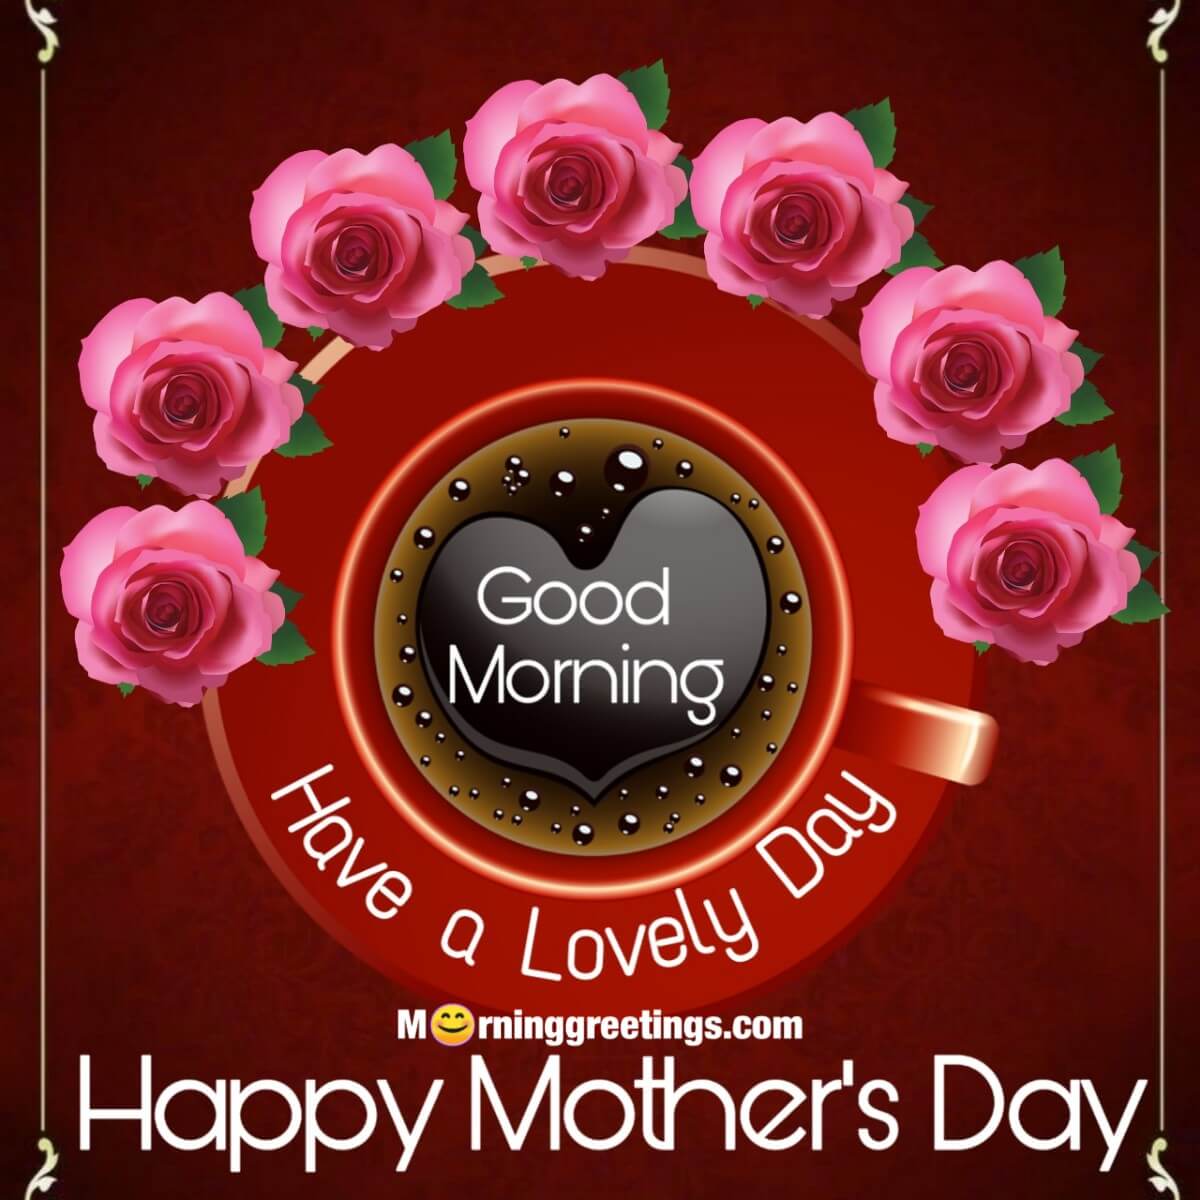 Good Morning Have A Lovely Day Happy Mother’s Day